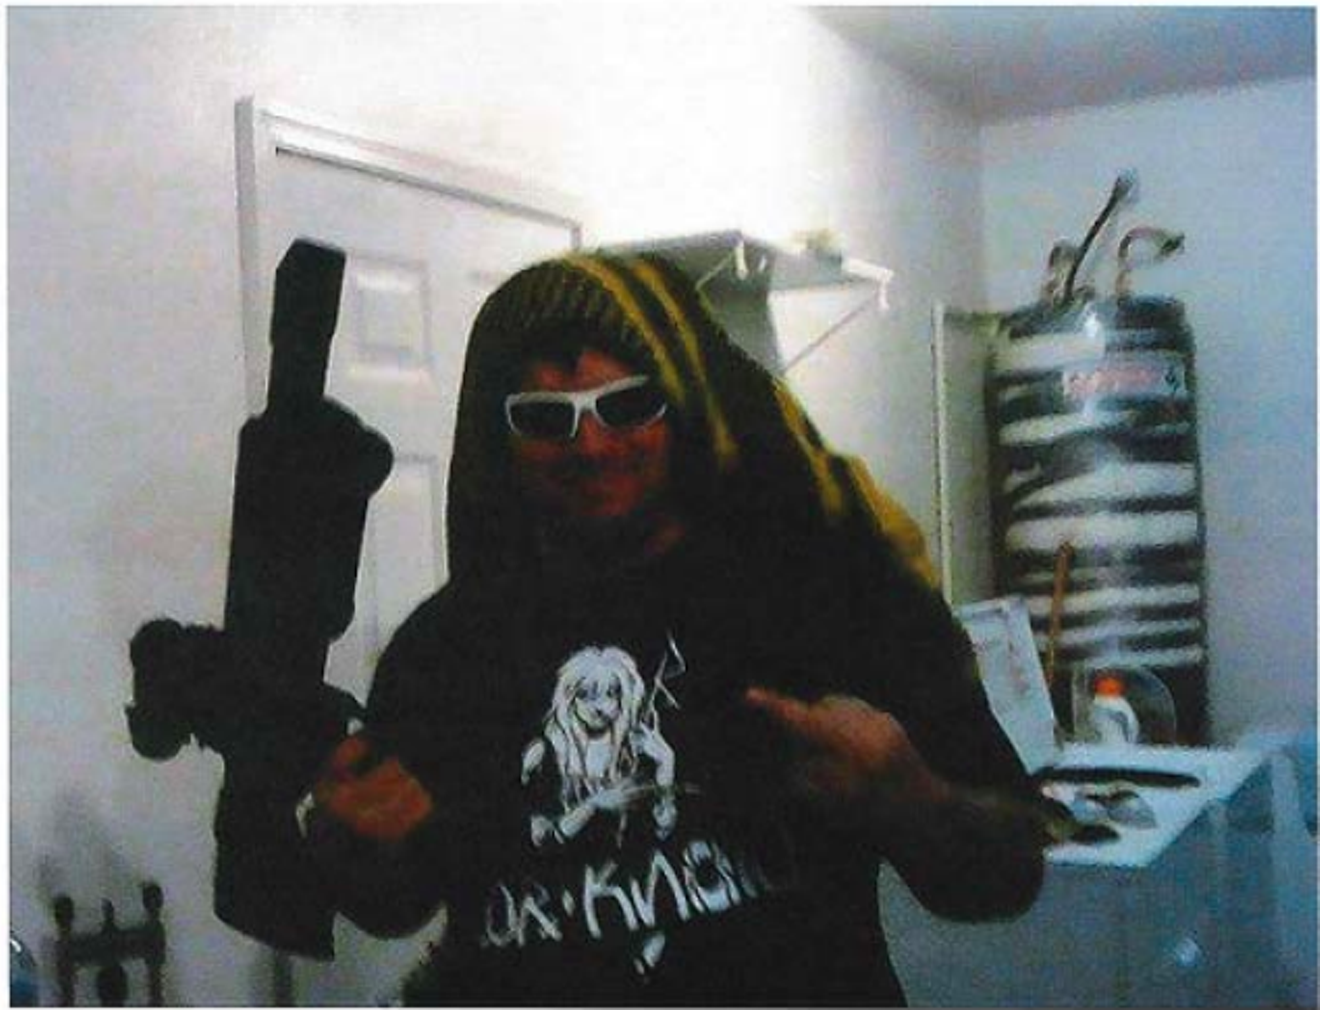 Wells holds a long gun in a photo posted on Facebook.